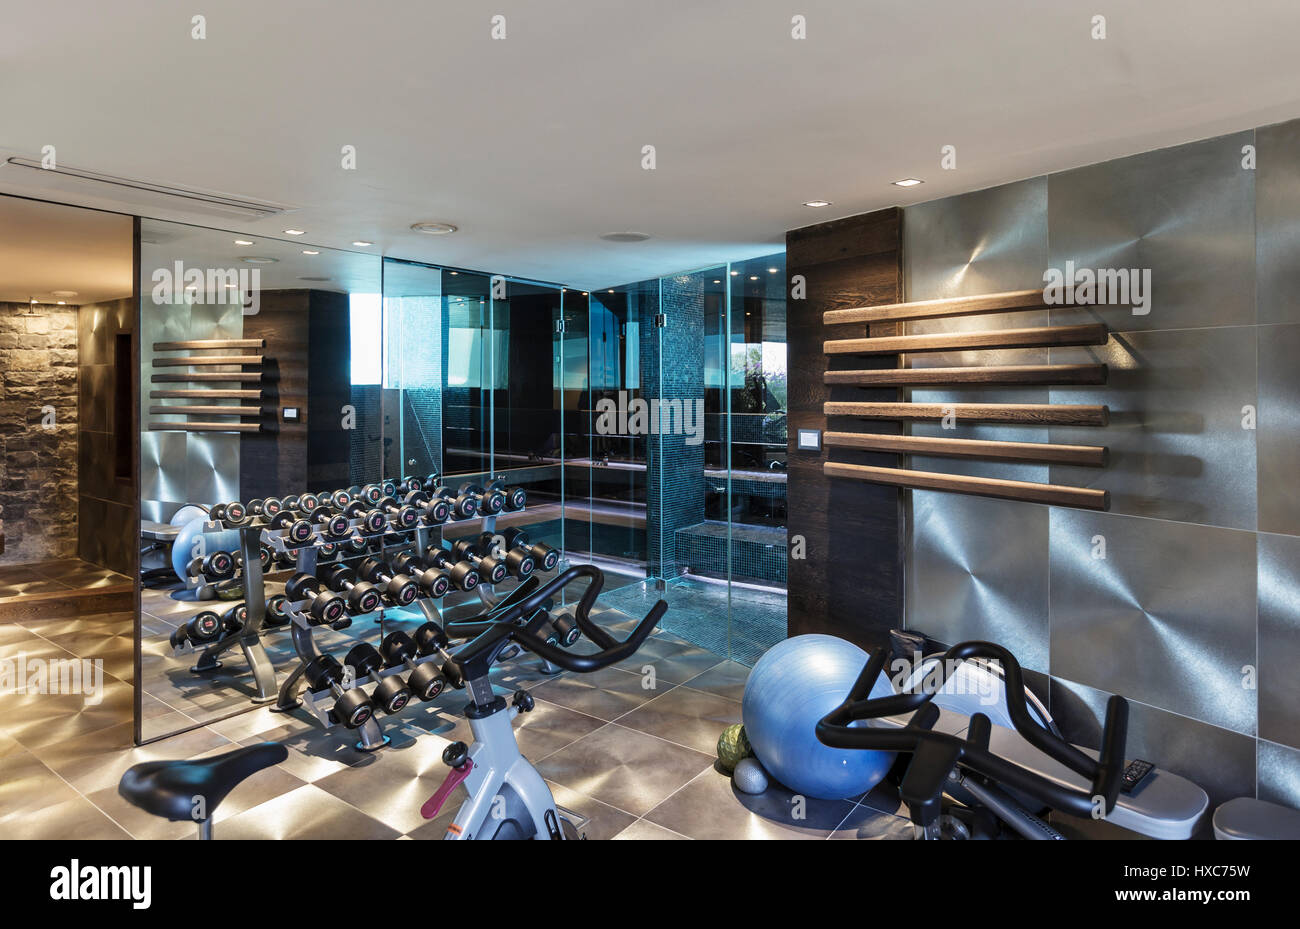 Gym with equipment in modern luxury home showcase interior Stock Photo